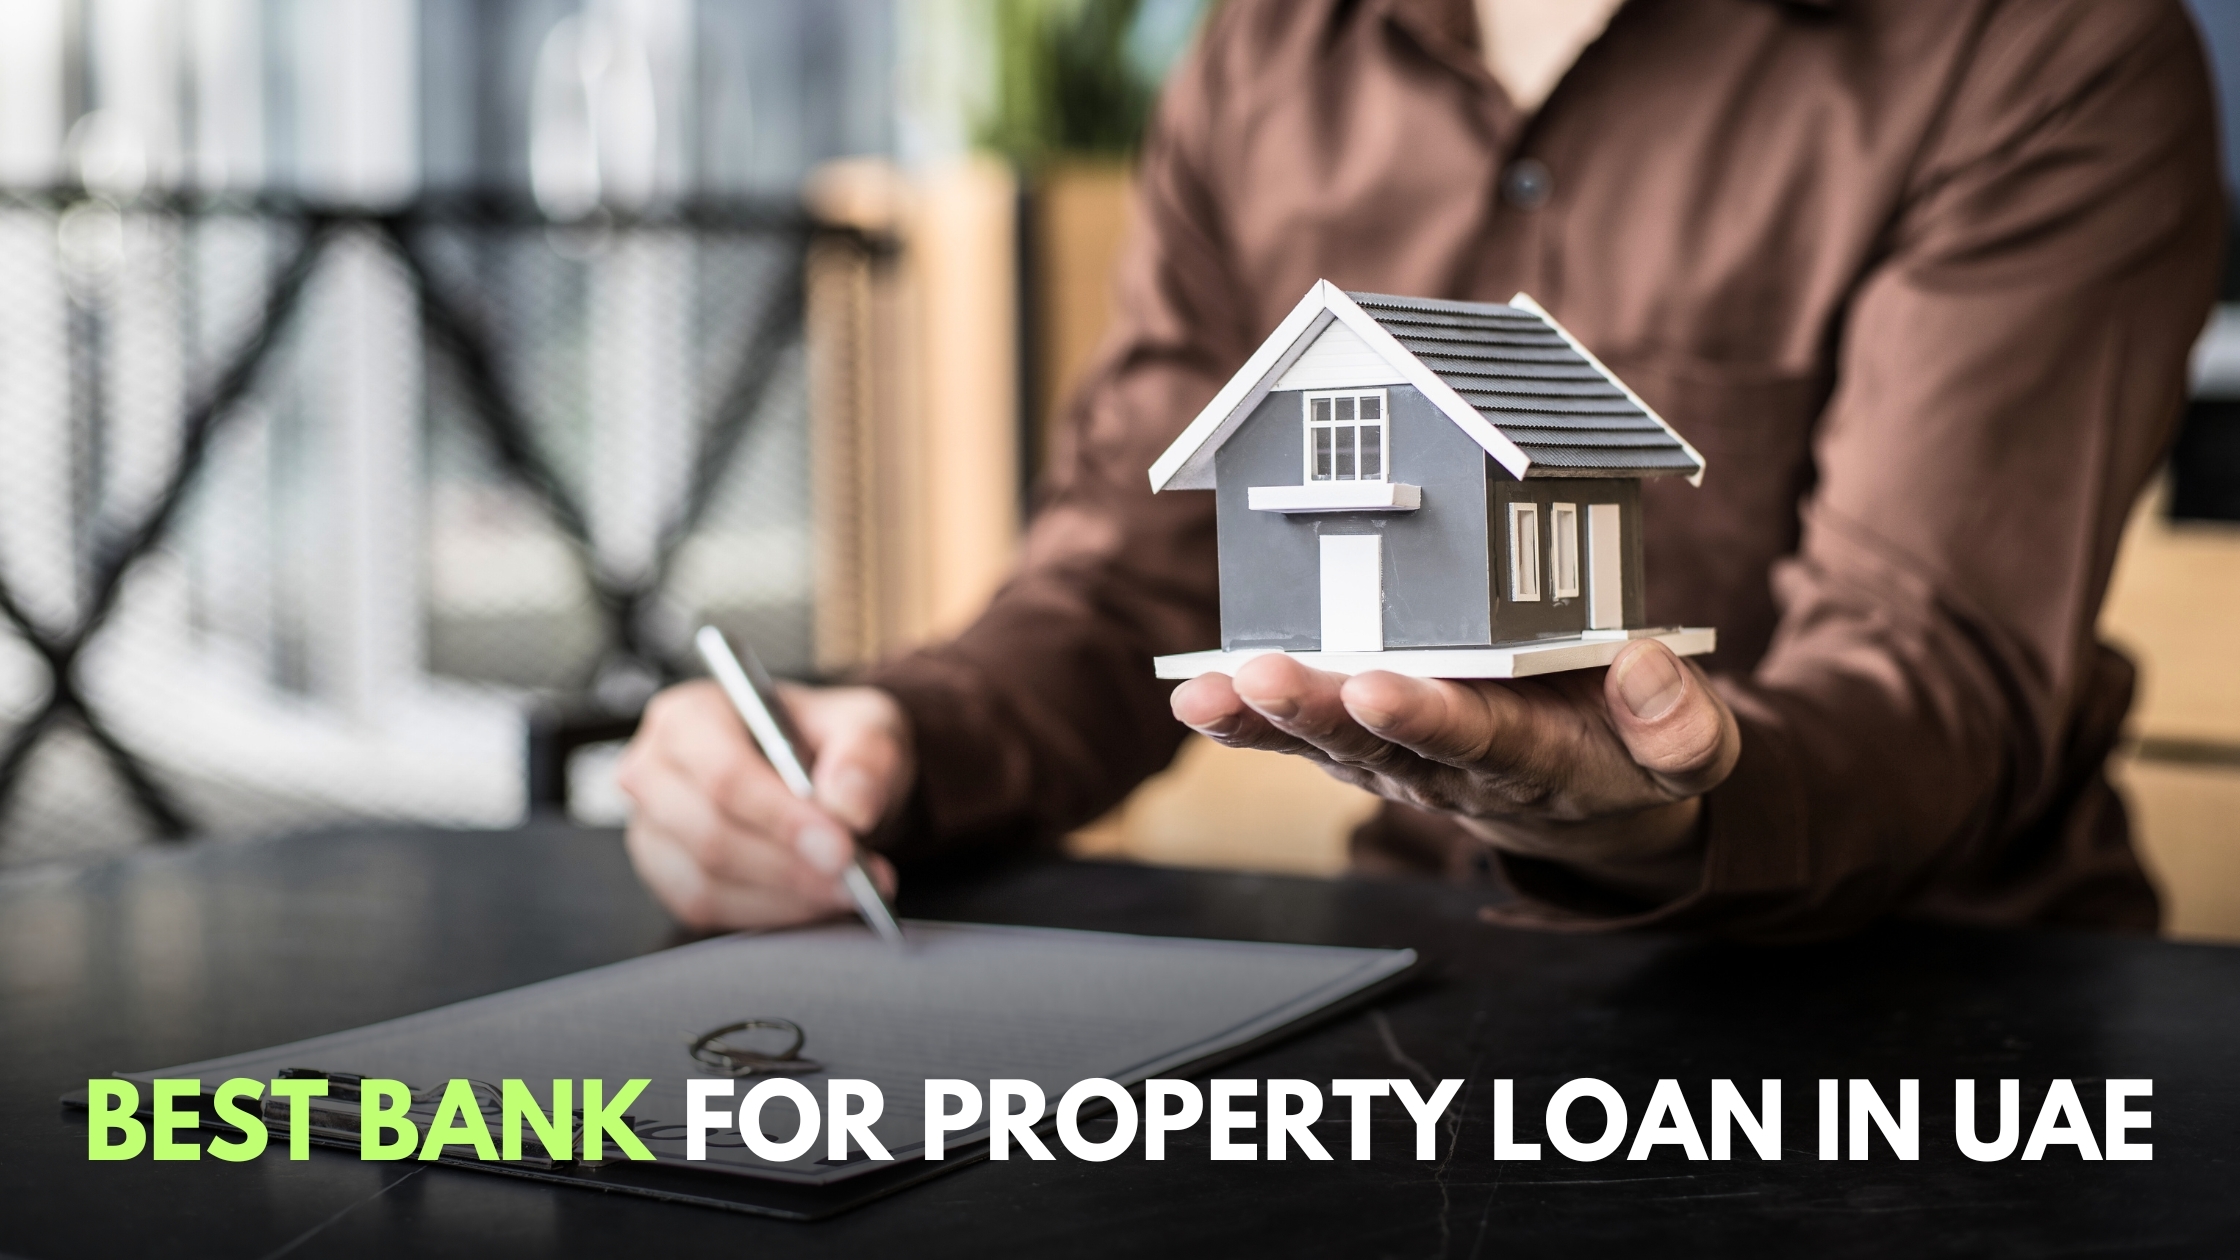 Best banks for property loans in uae